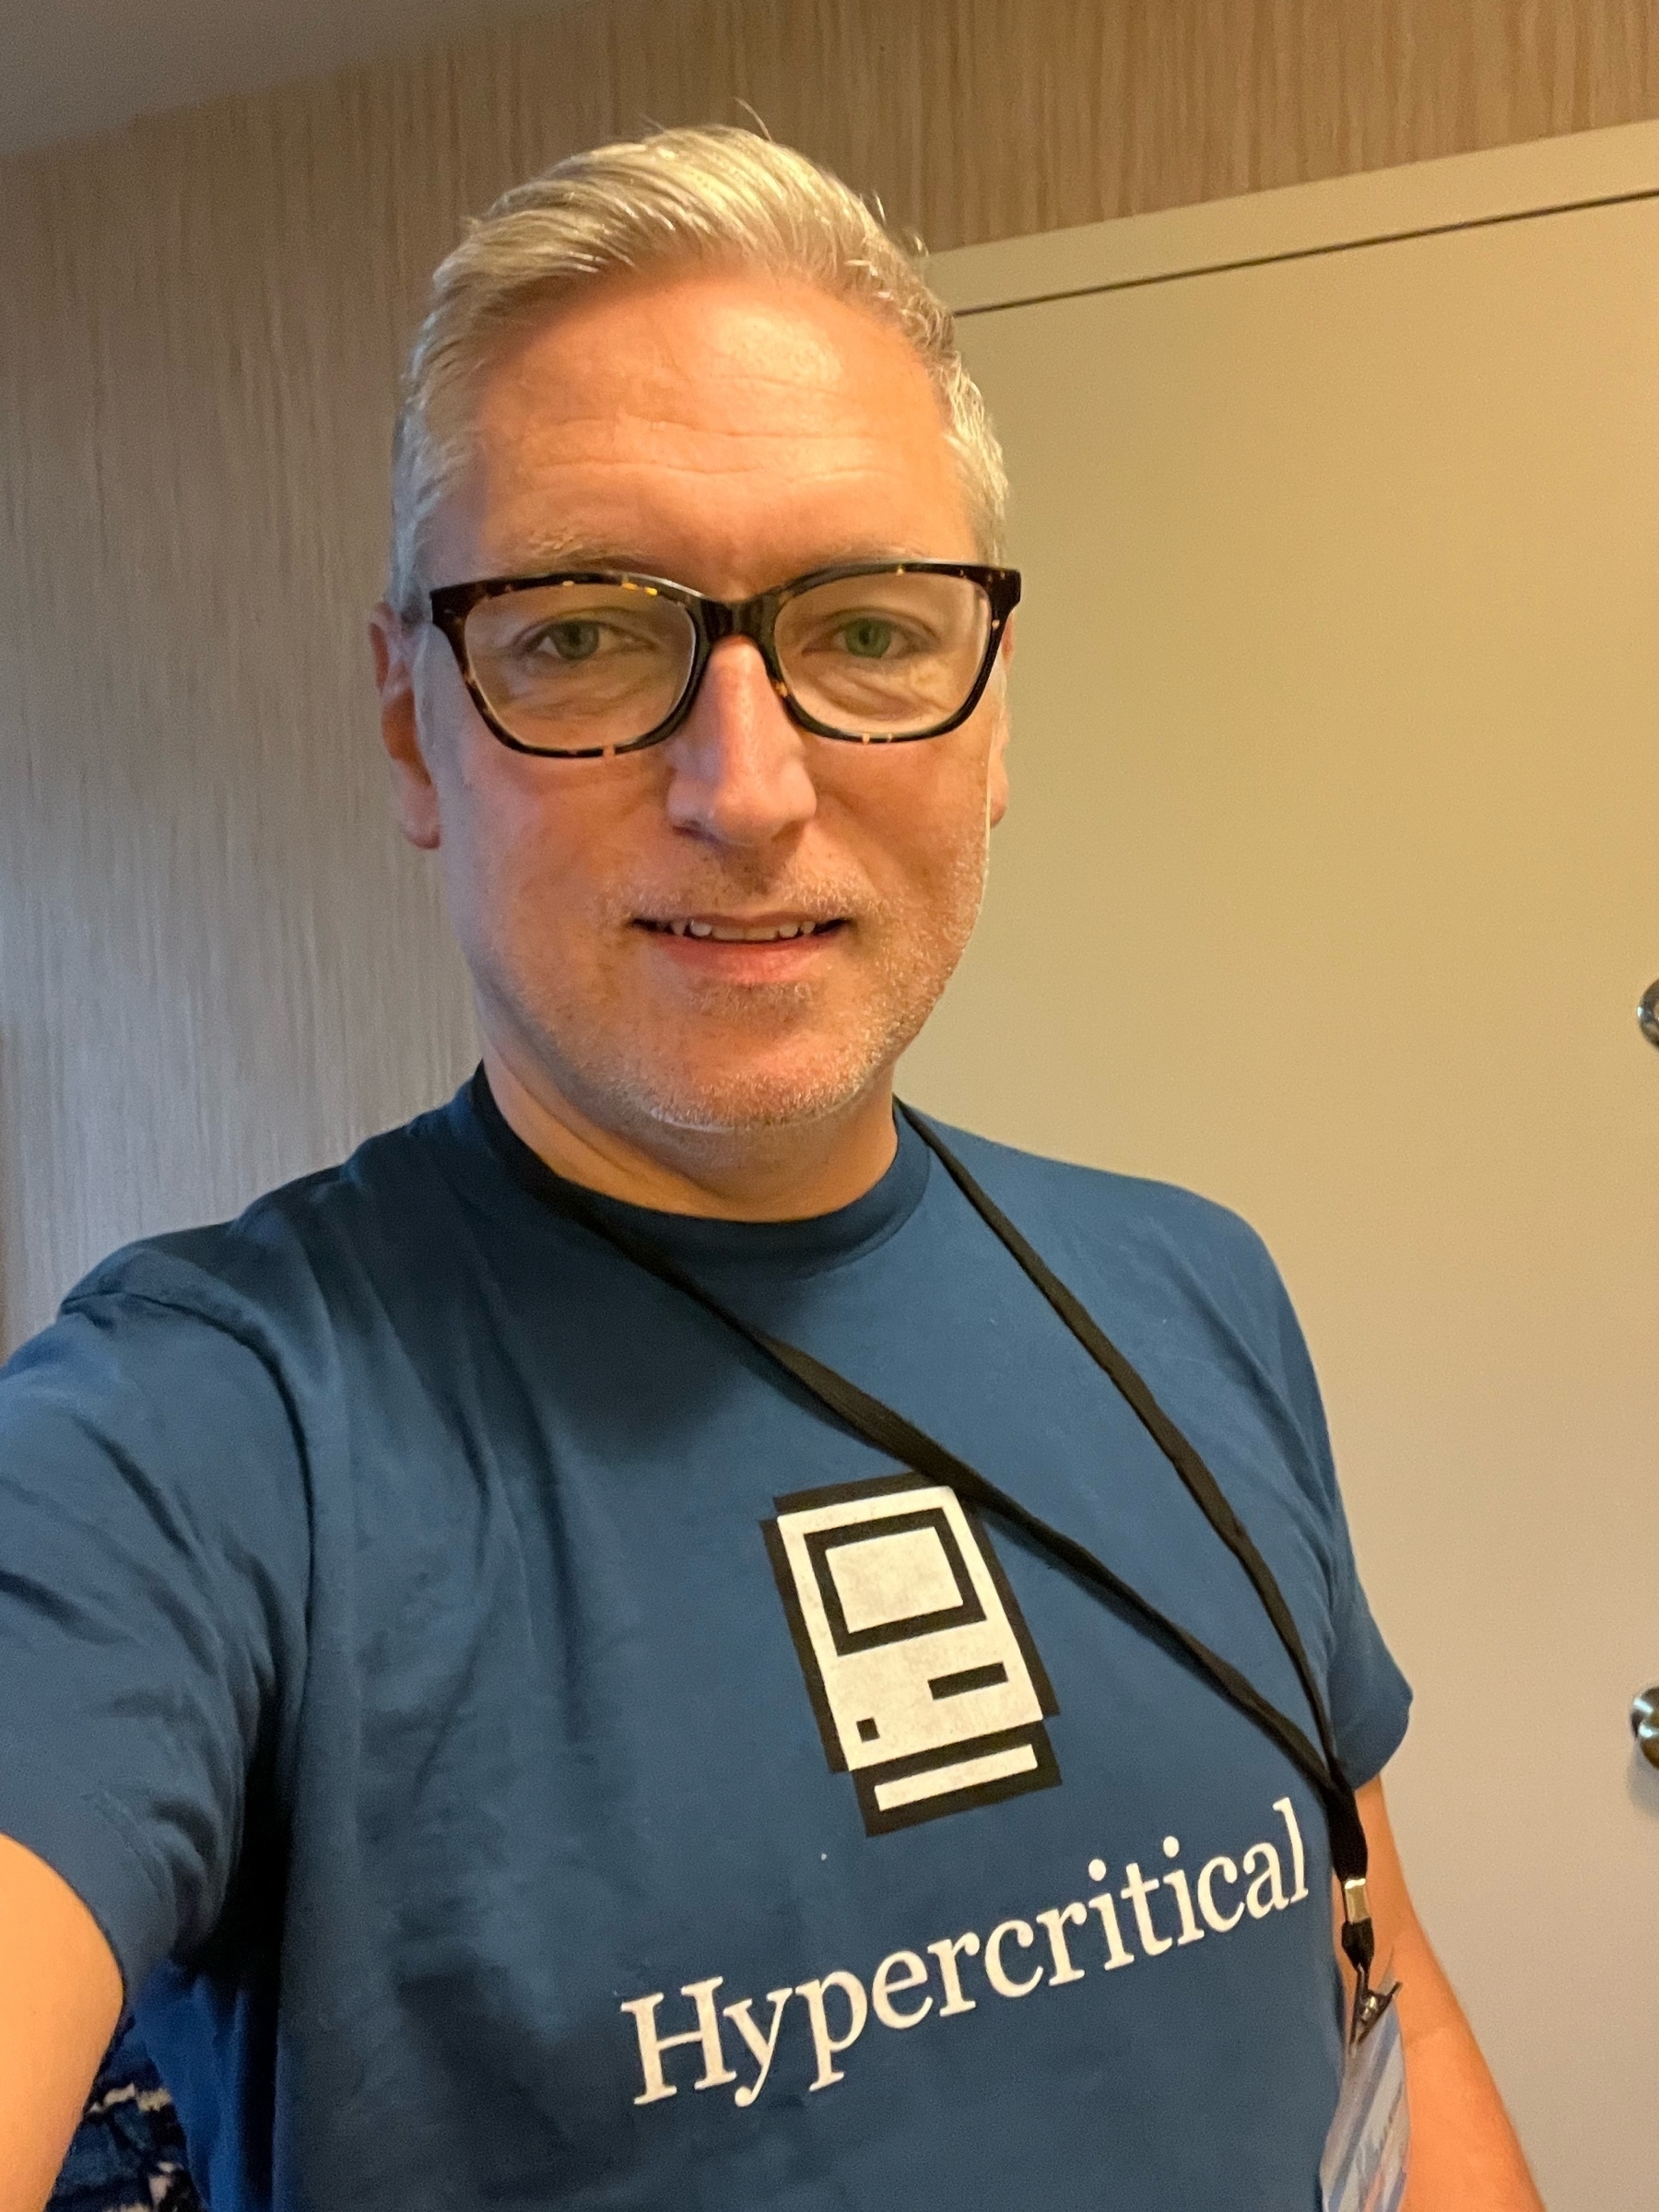 Selfie of white man with gray hair wearing a blue “Hypercritical” tee shirt with classic Mac icon.